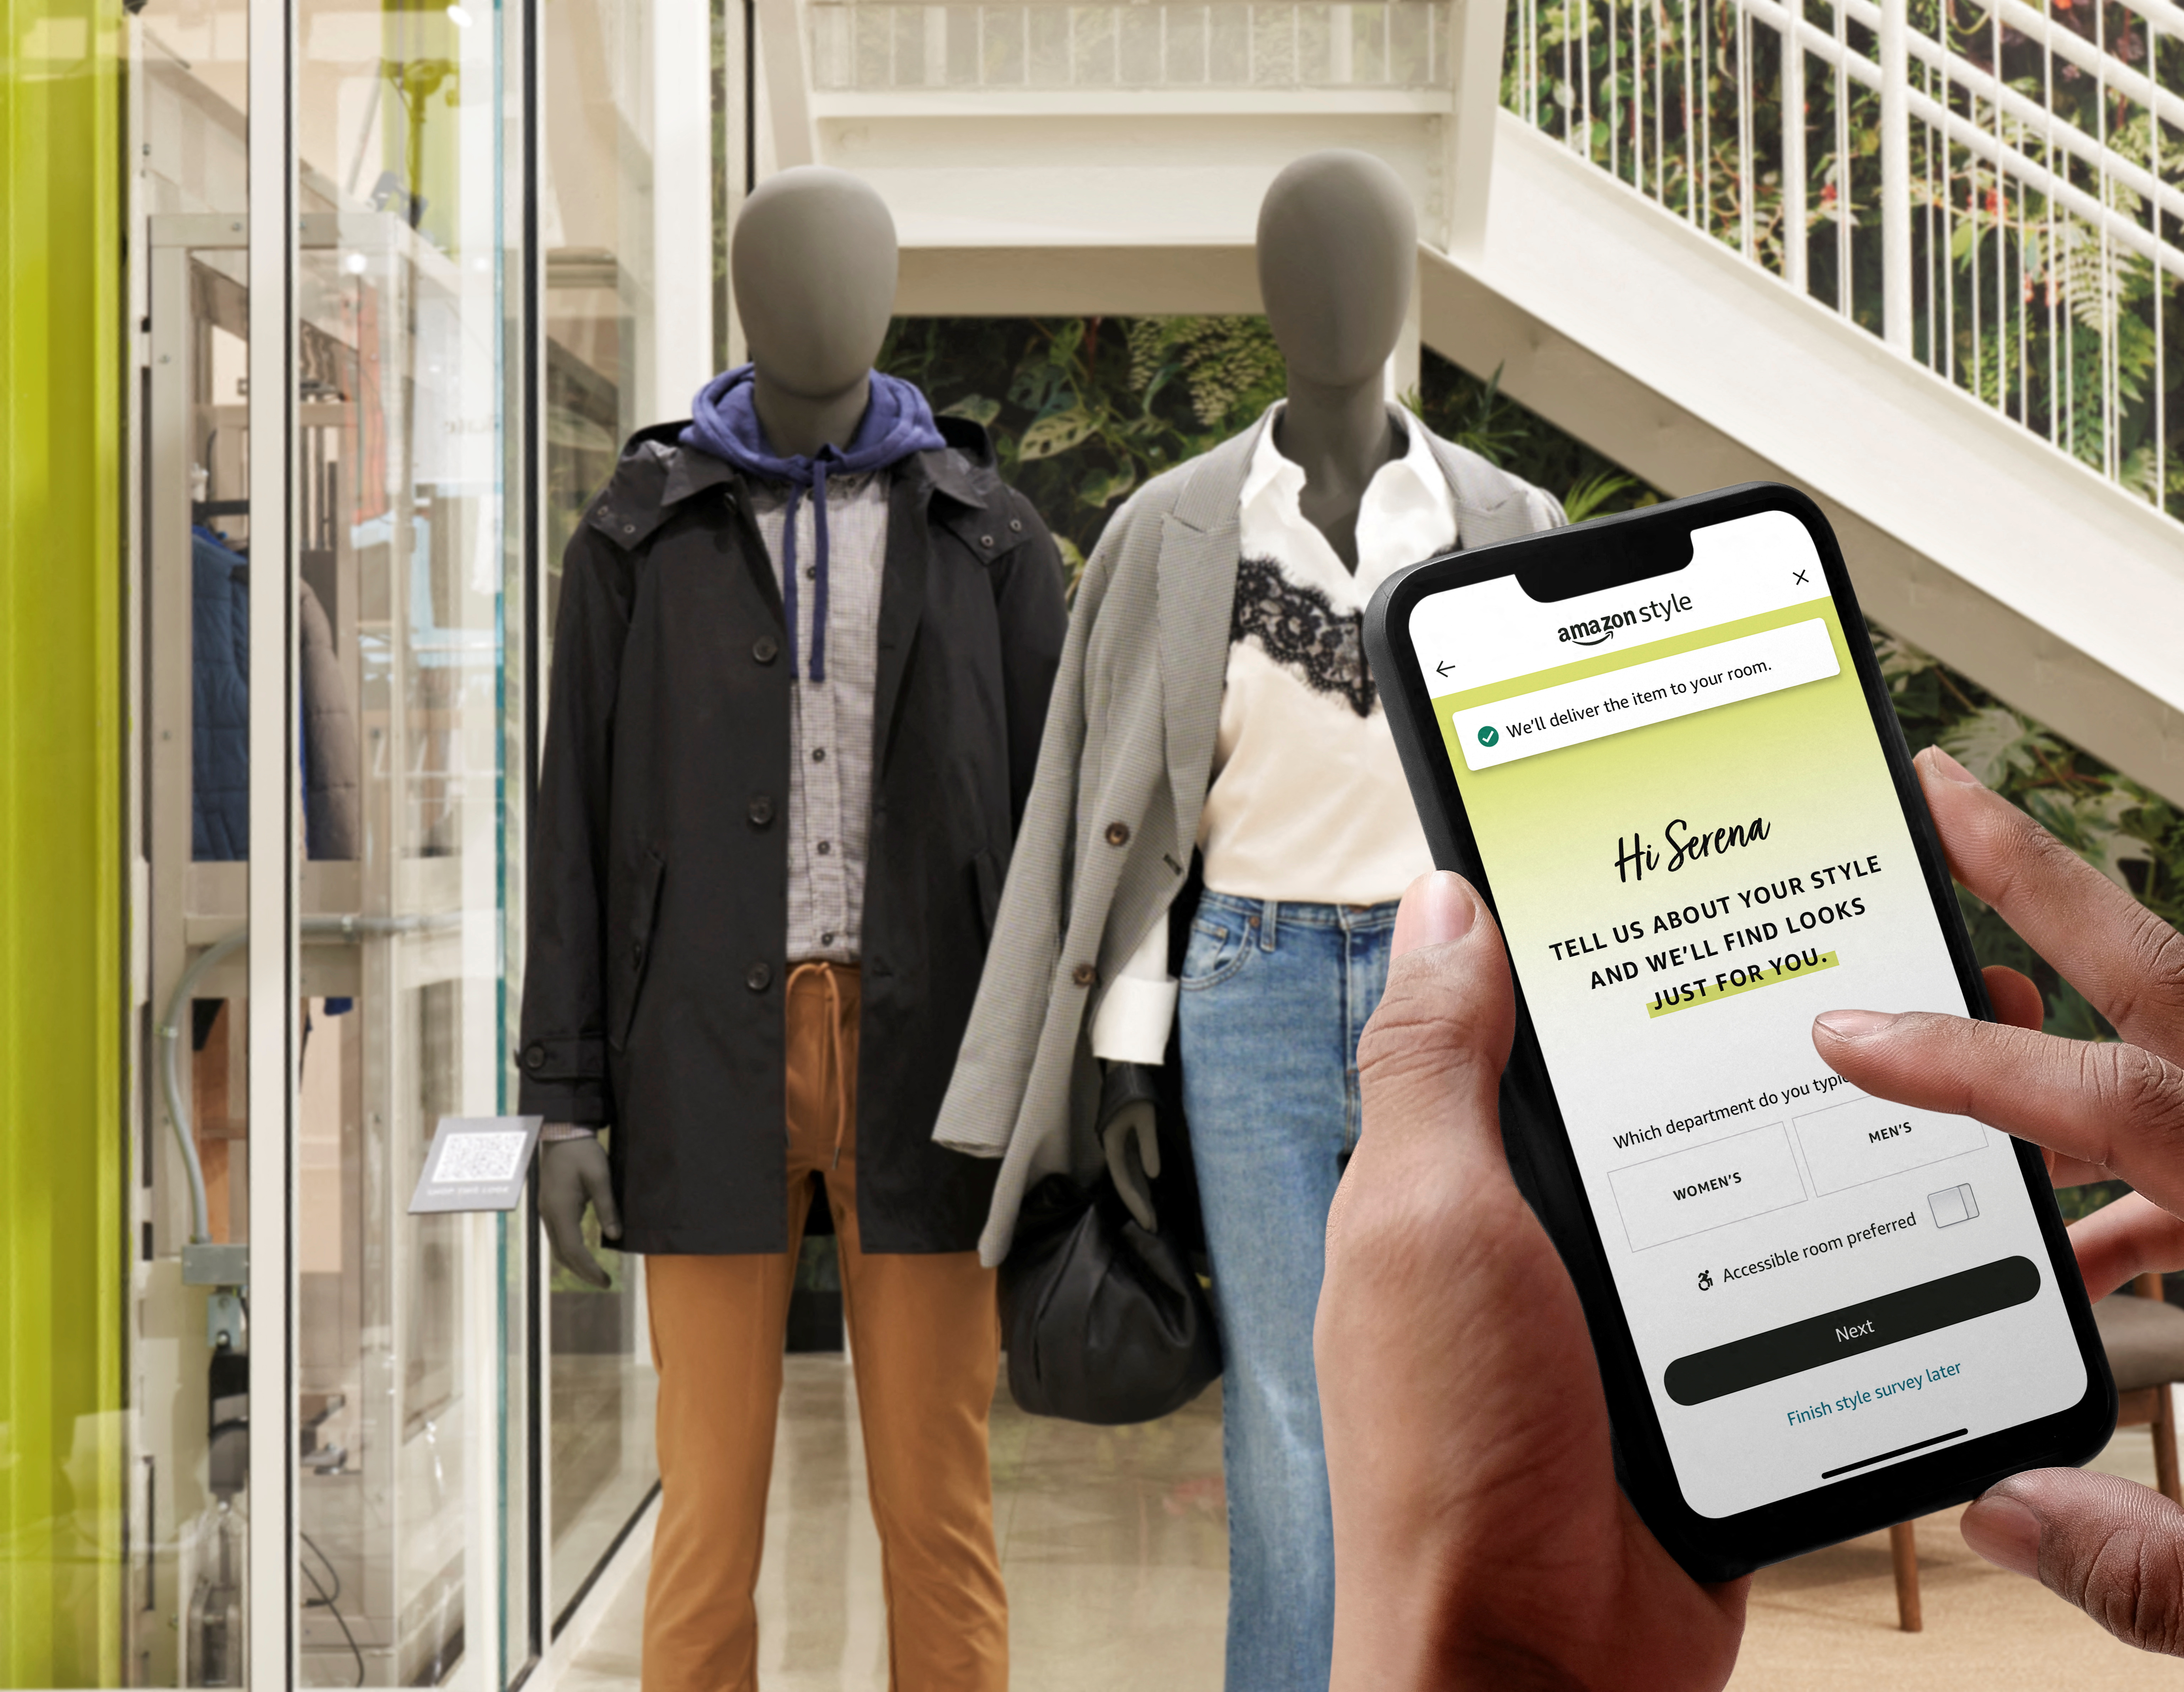 Amazon.com Inc's upcoming physical fashion store is seen in handout image